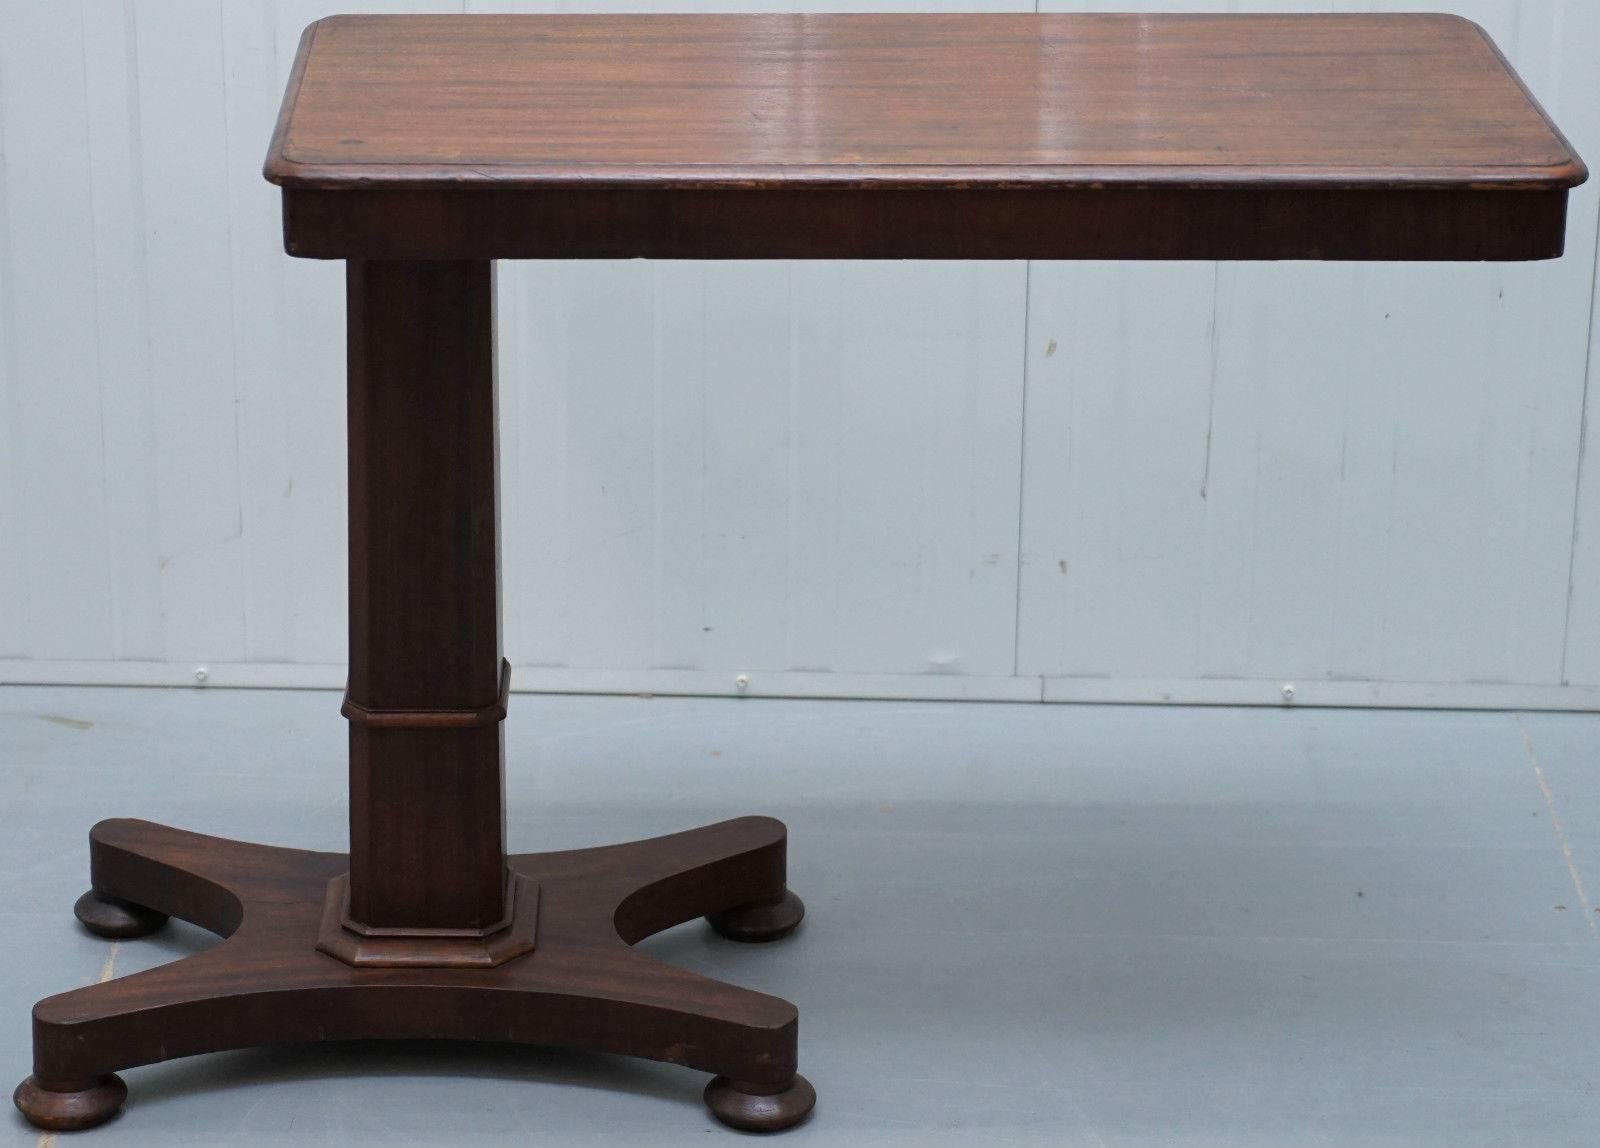 British Rare Victorian Reading Table Height and Tilt Adjustable Stands over Bed Console